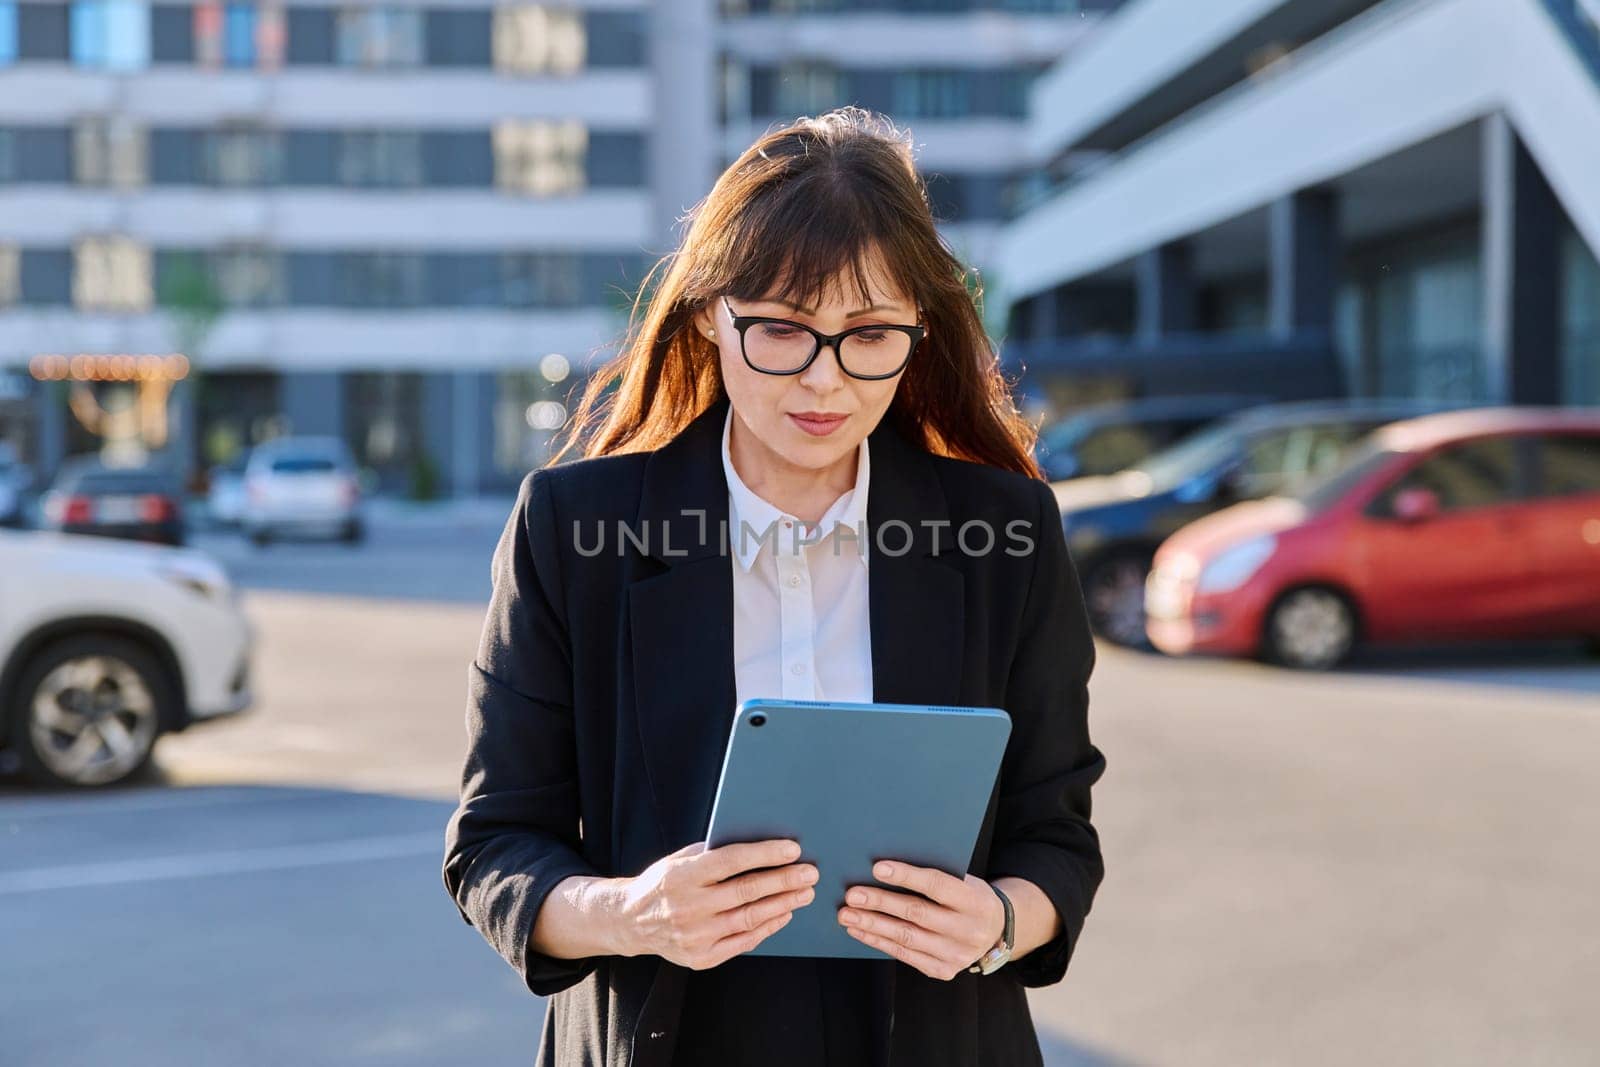 Mature woman manager professional agent entrepreneur using digital tablet for work, modern city. Female leader businesswoman in business suit, outdoor, internet software applications apps technology